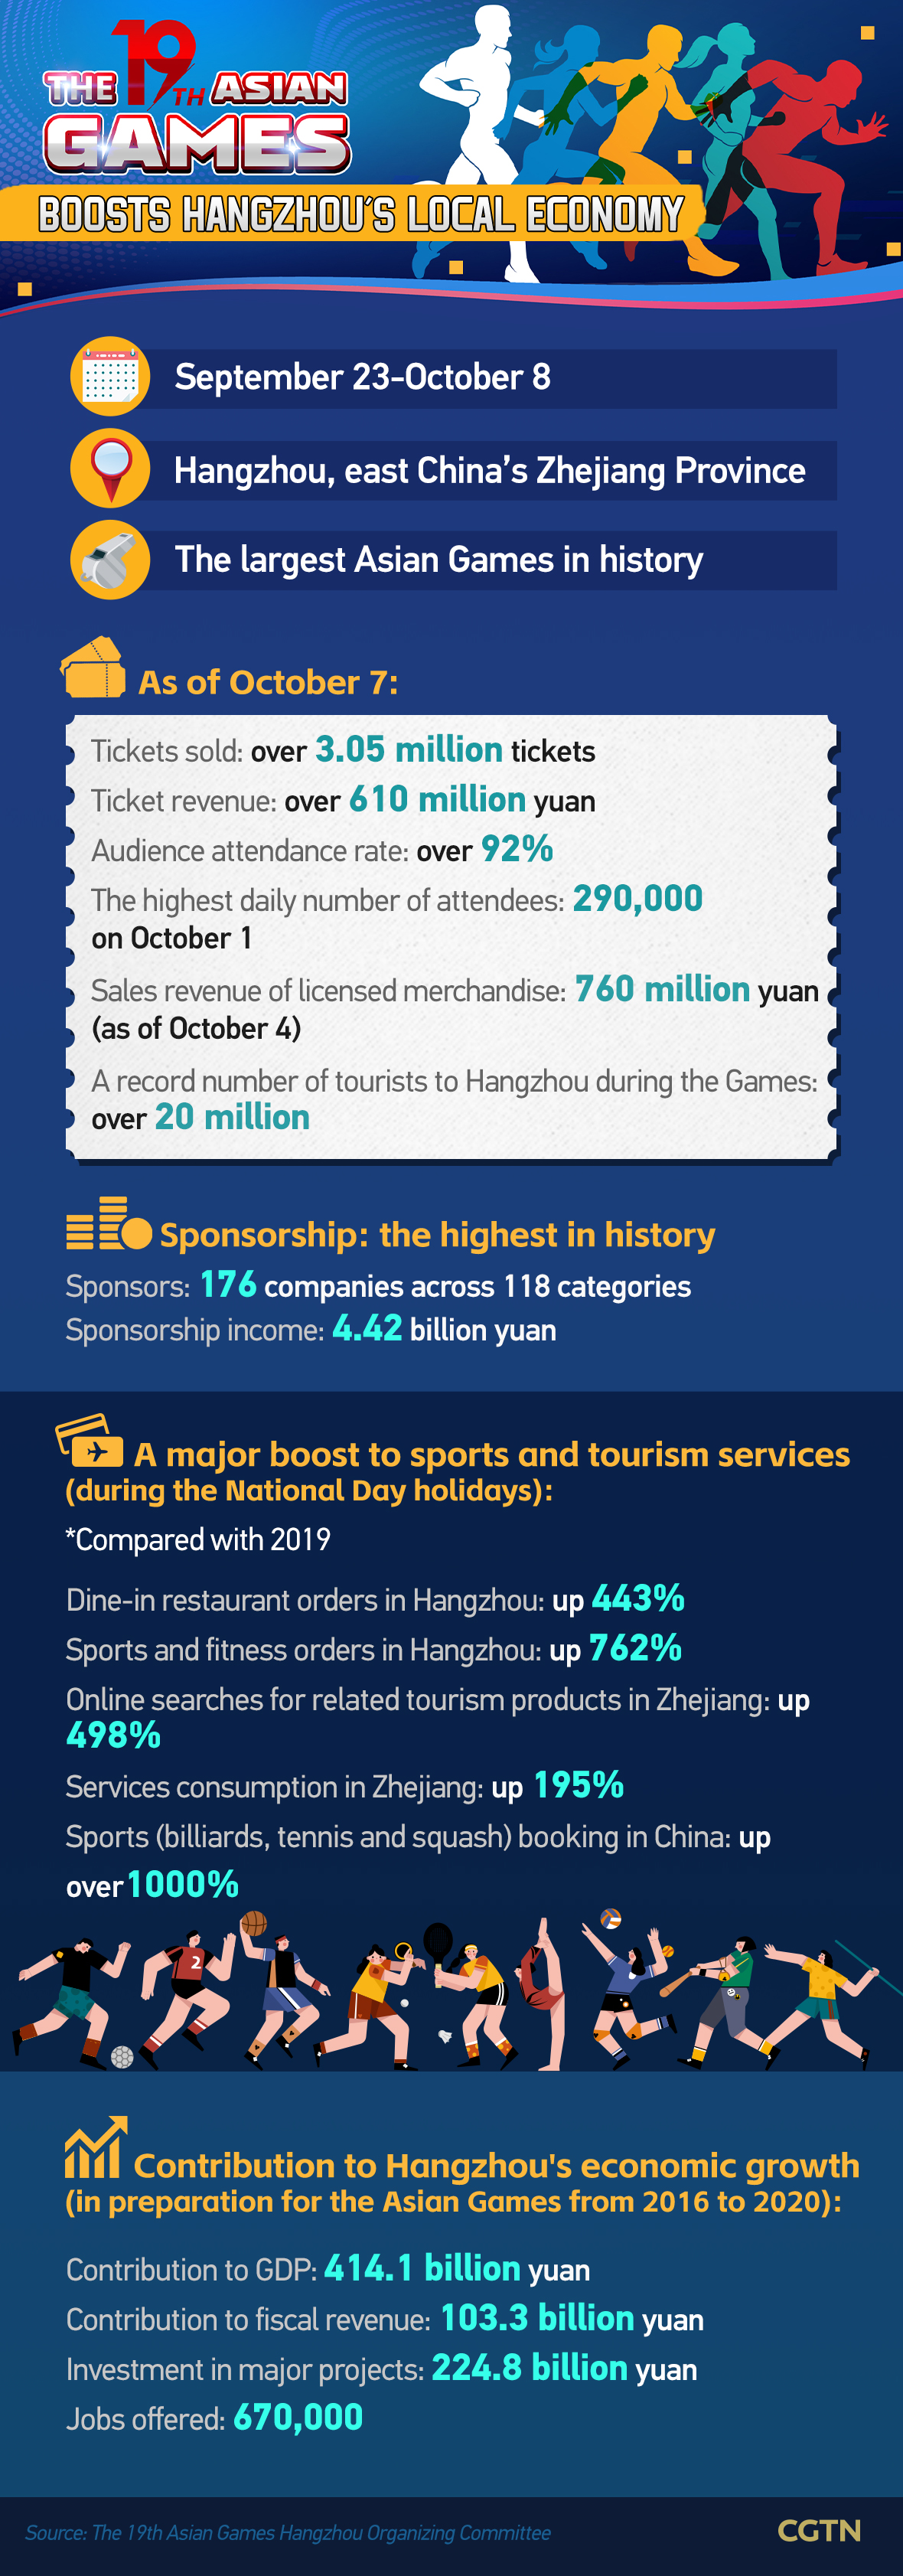 Graphics: The Asian Games boosts Hangzhou's local economy